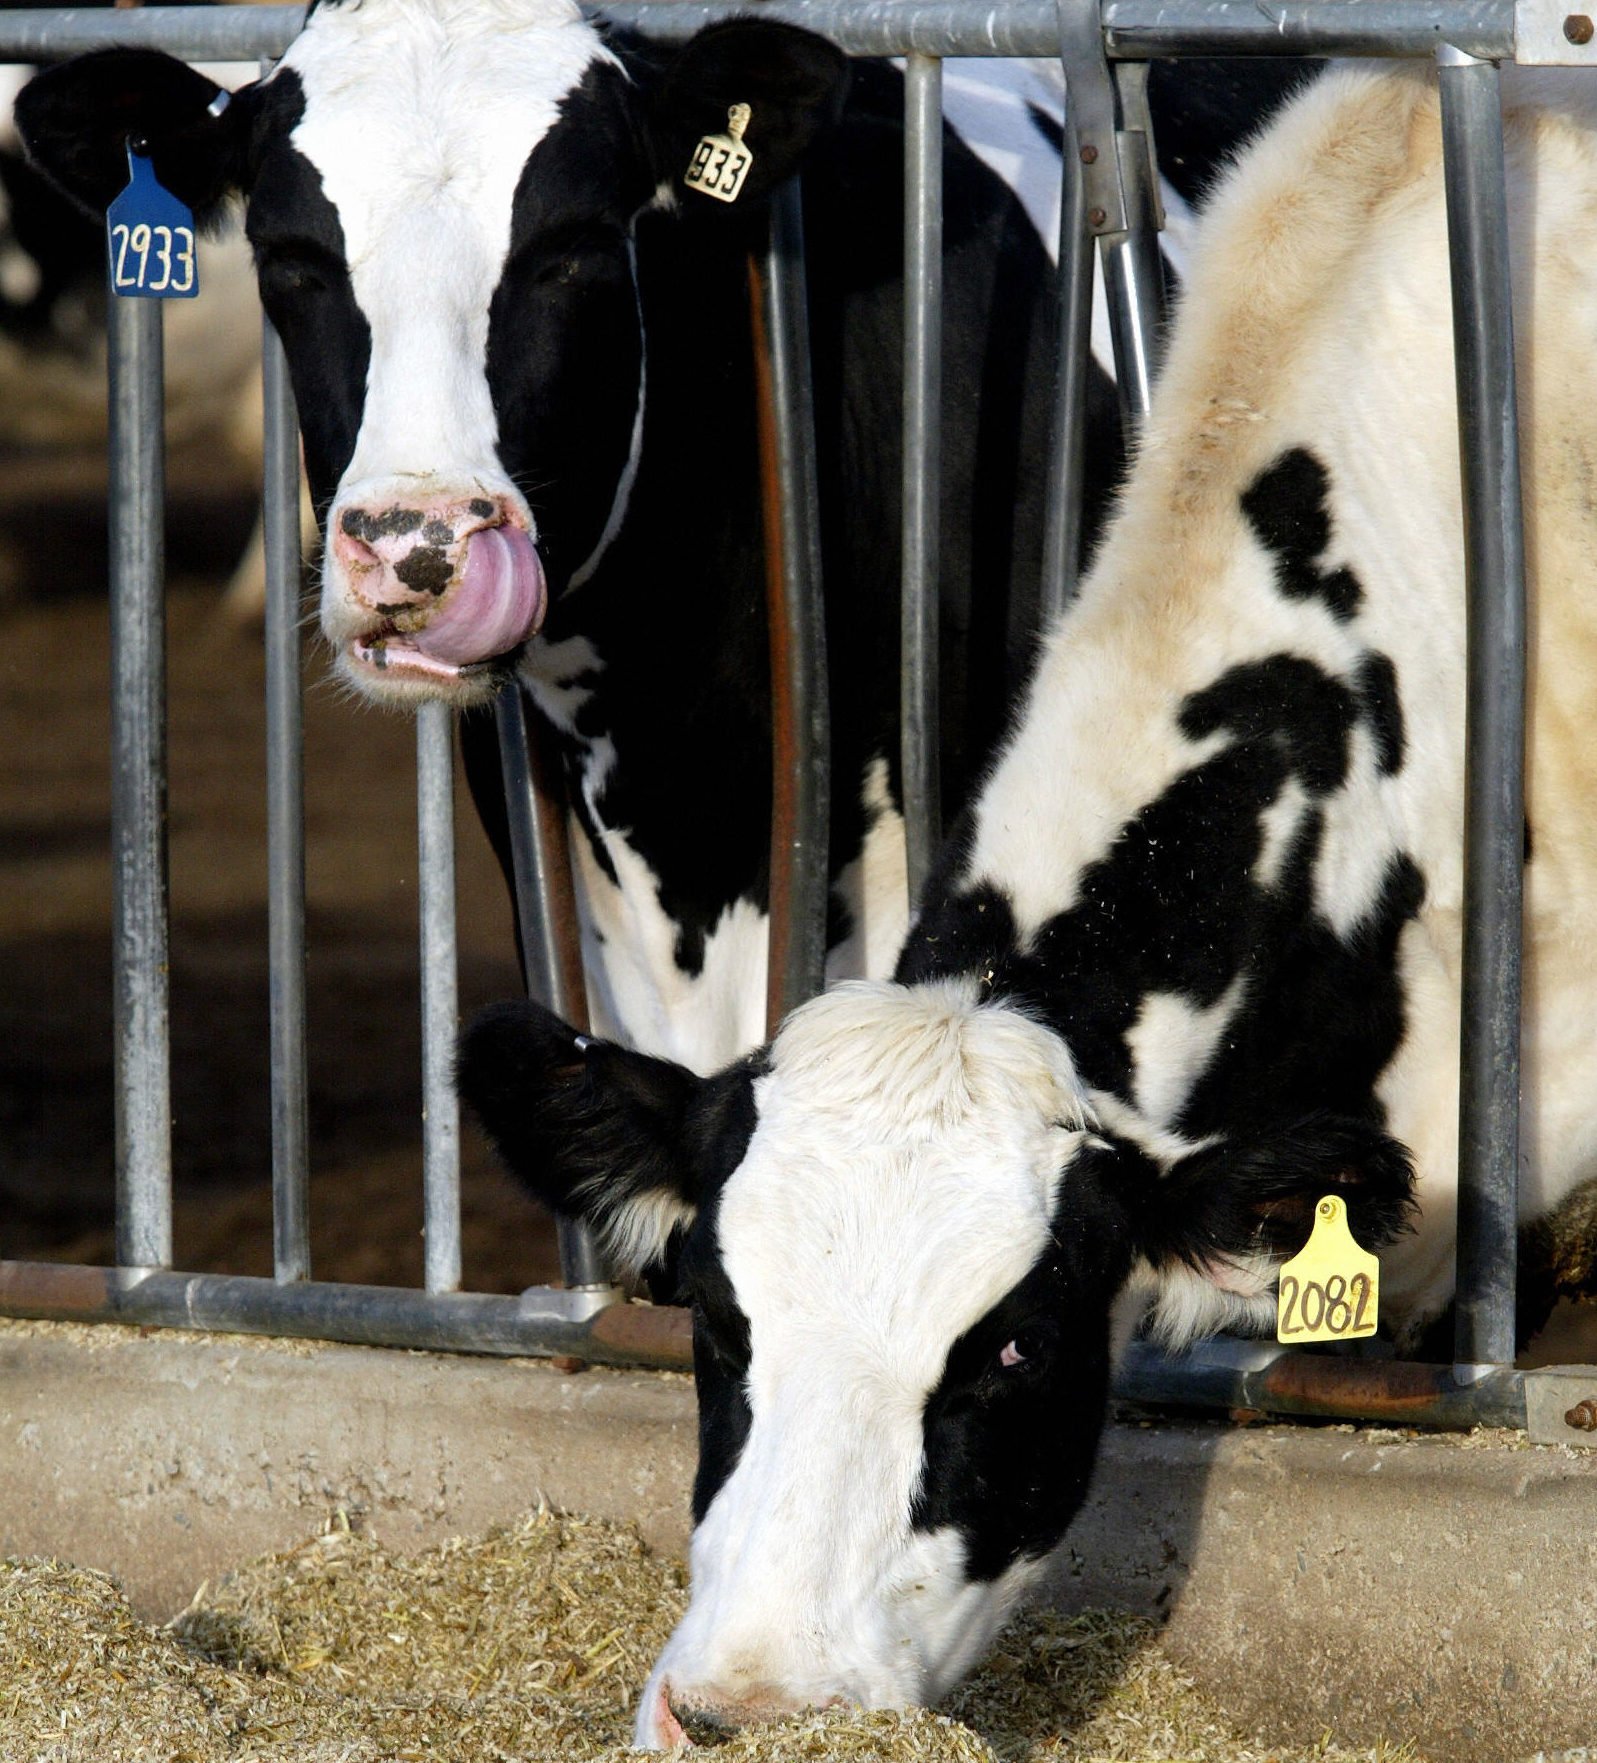 A pair of milk cows eat 29 December 2003 in a lot near Greeley, Colorado. (Photo by DON EMMERT/AFP/Getty Images)